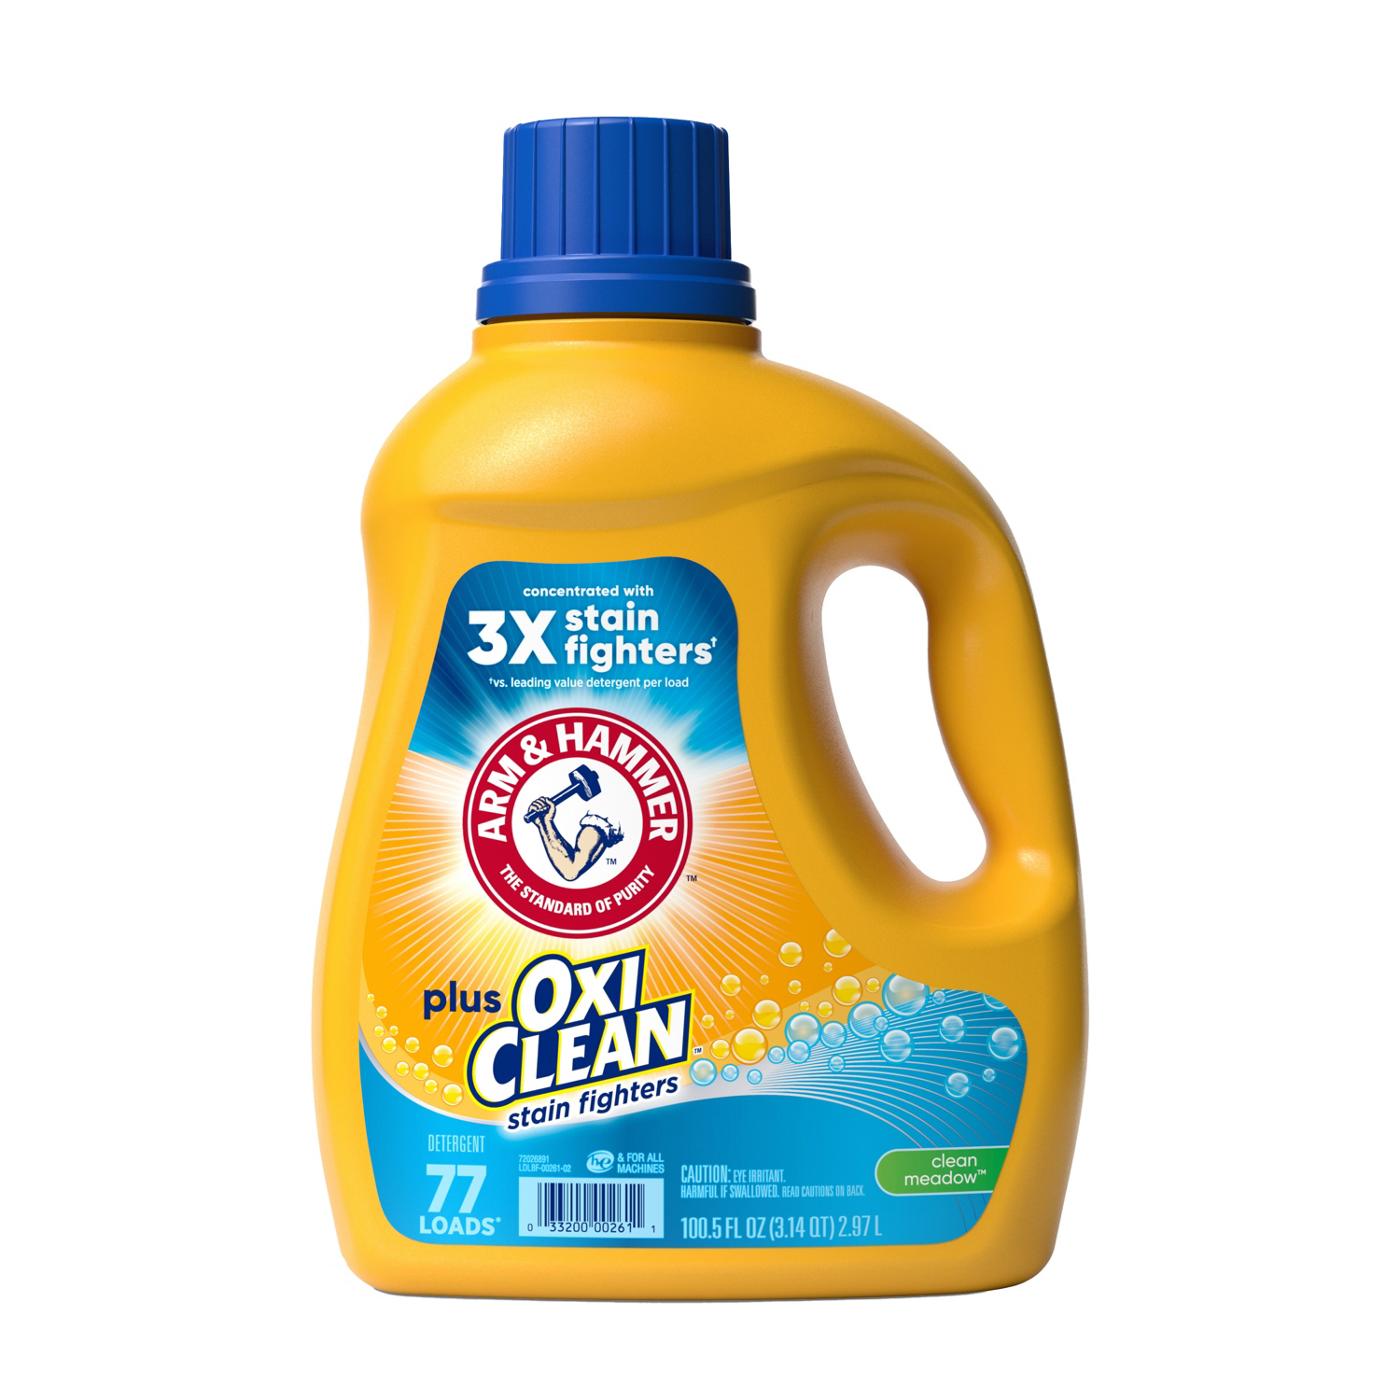 Arm & Hammer Plus OxiClean HE Liquid Laundry Detergent, 77 Loads - Clean Meadow; image 1 of 4